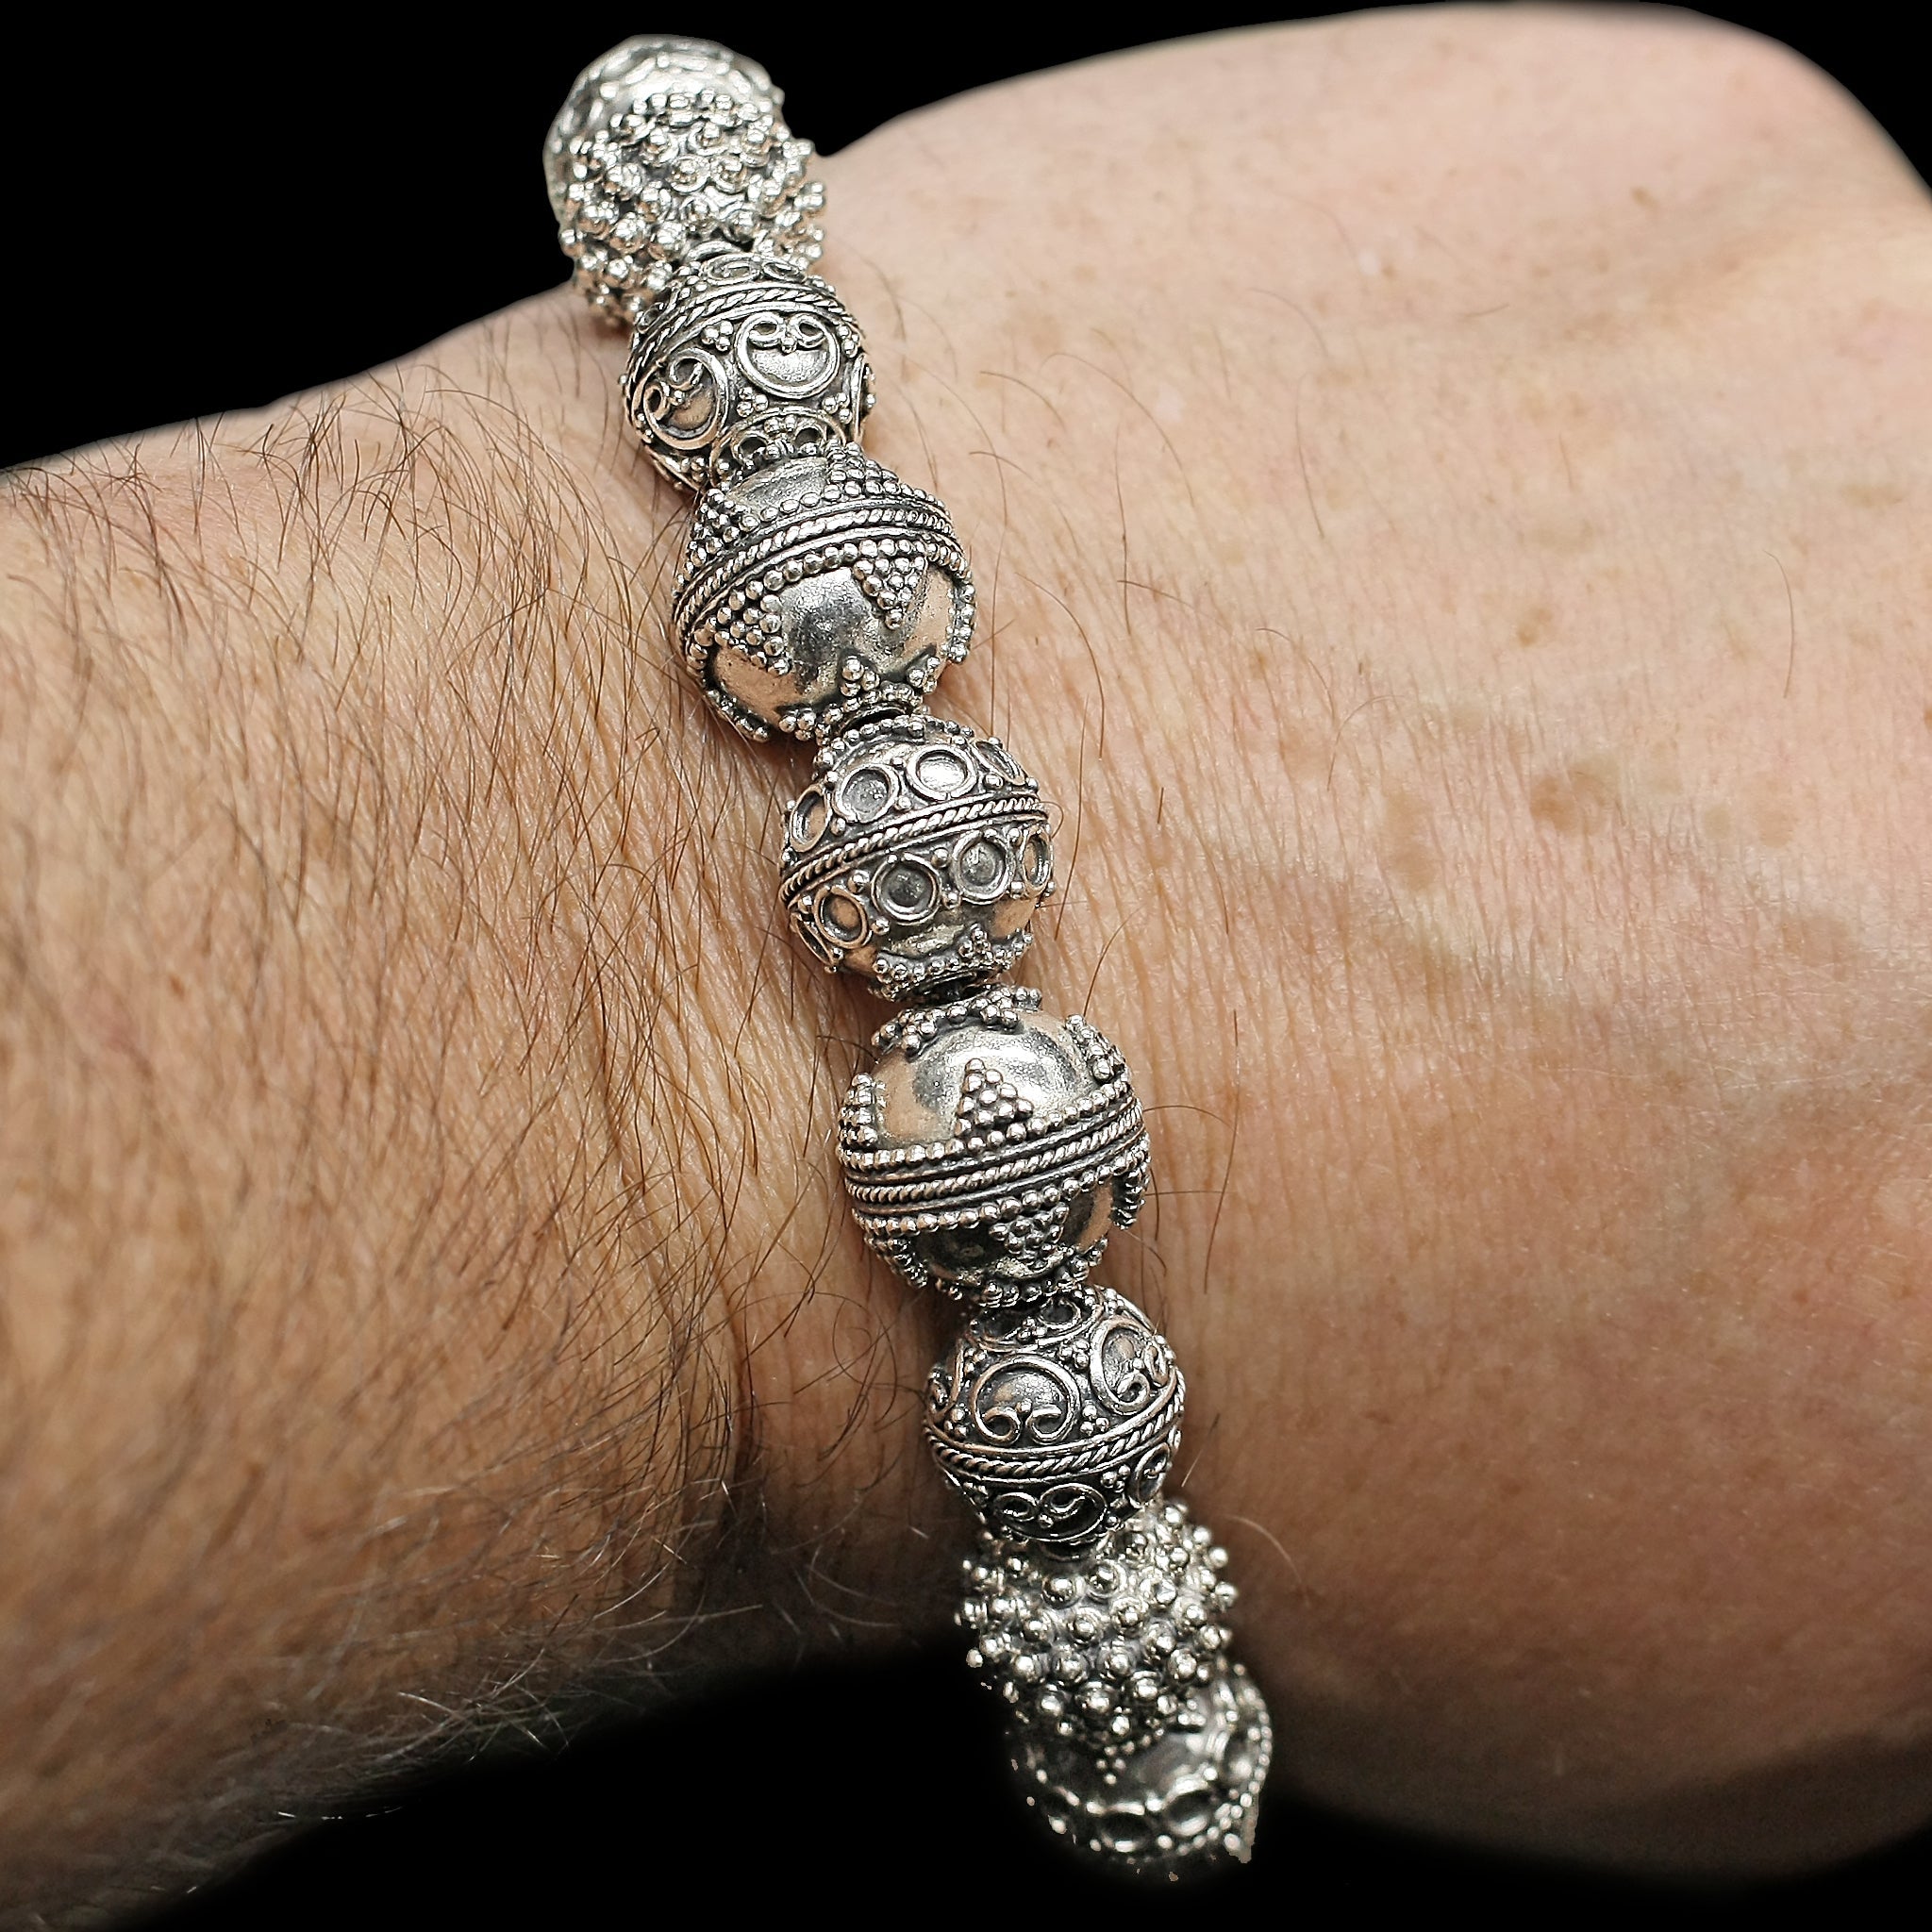 Silver Viking Beads from Visby on Wrist